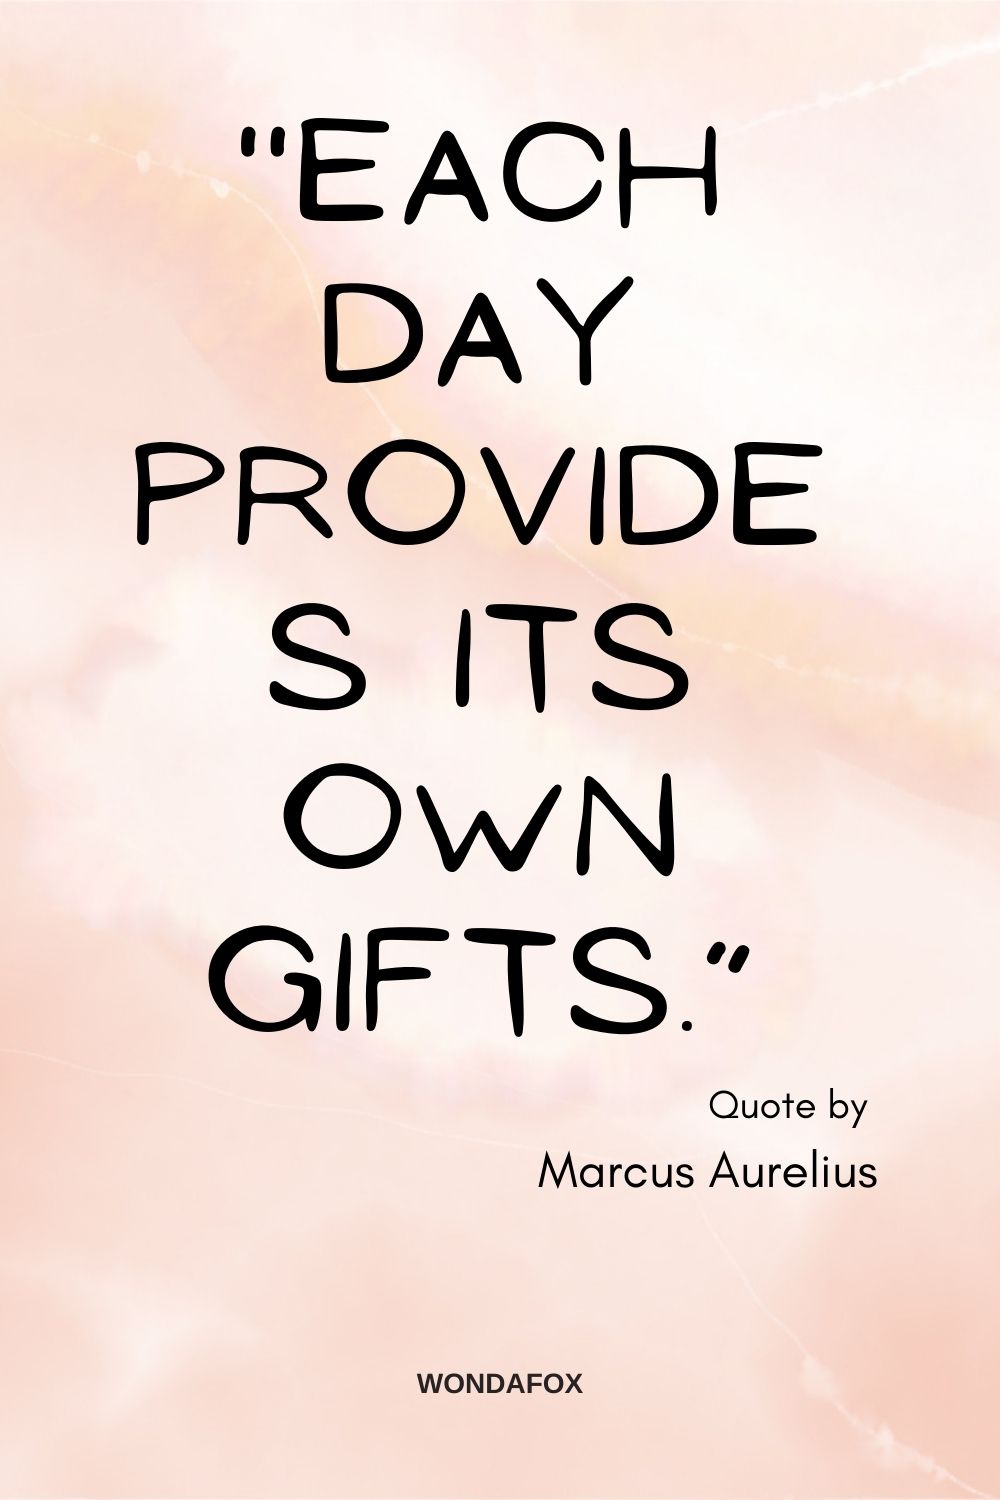 “Each day provides its own gifts.”
Marcus Aurelius